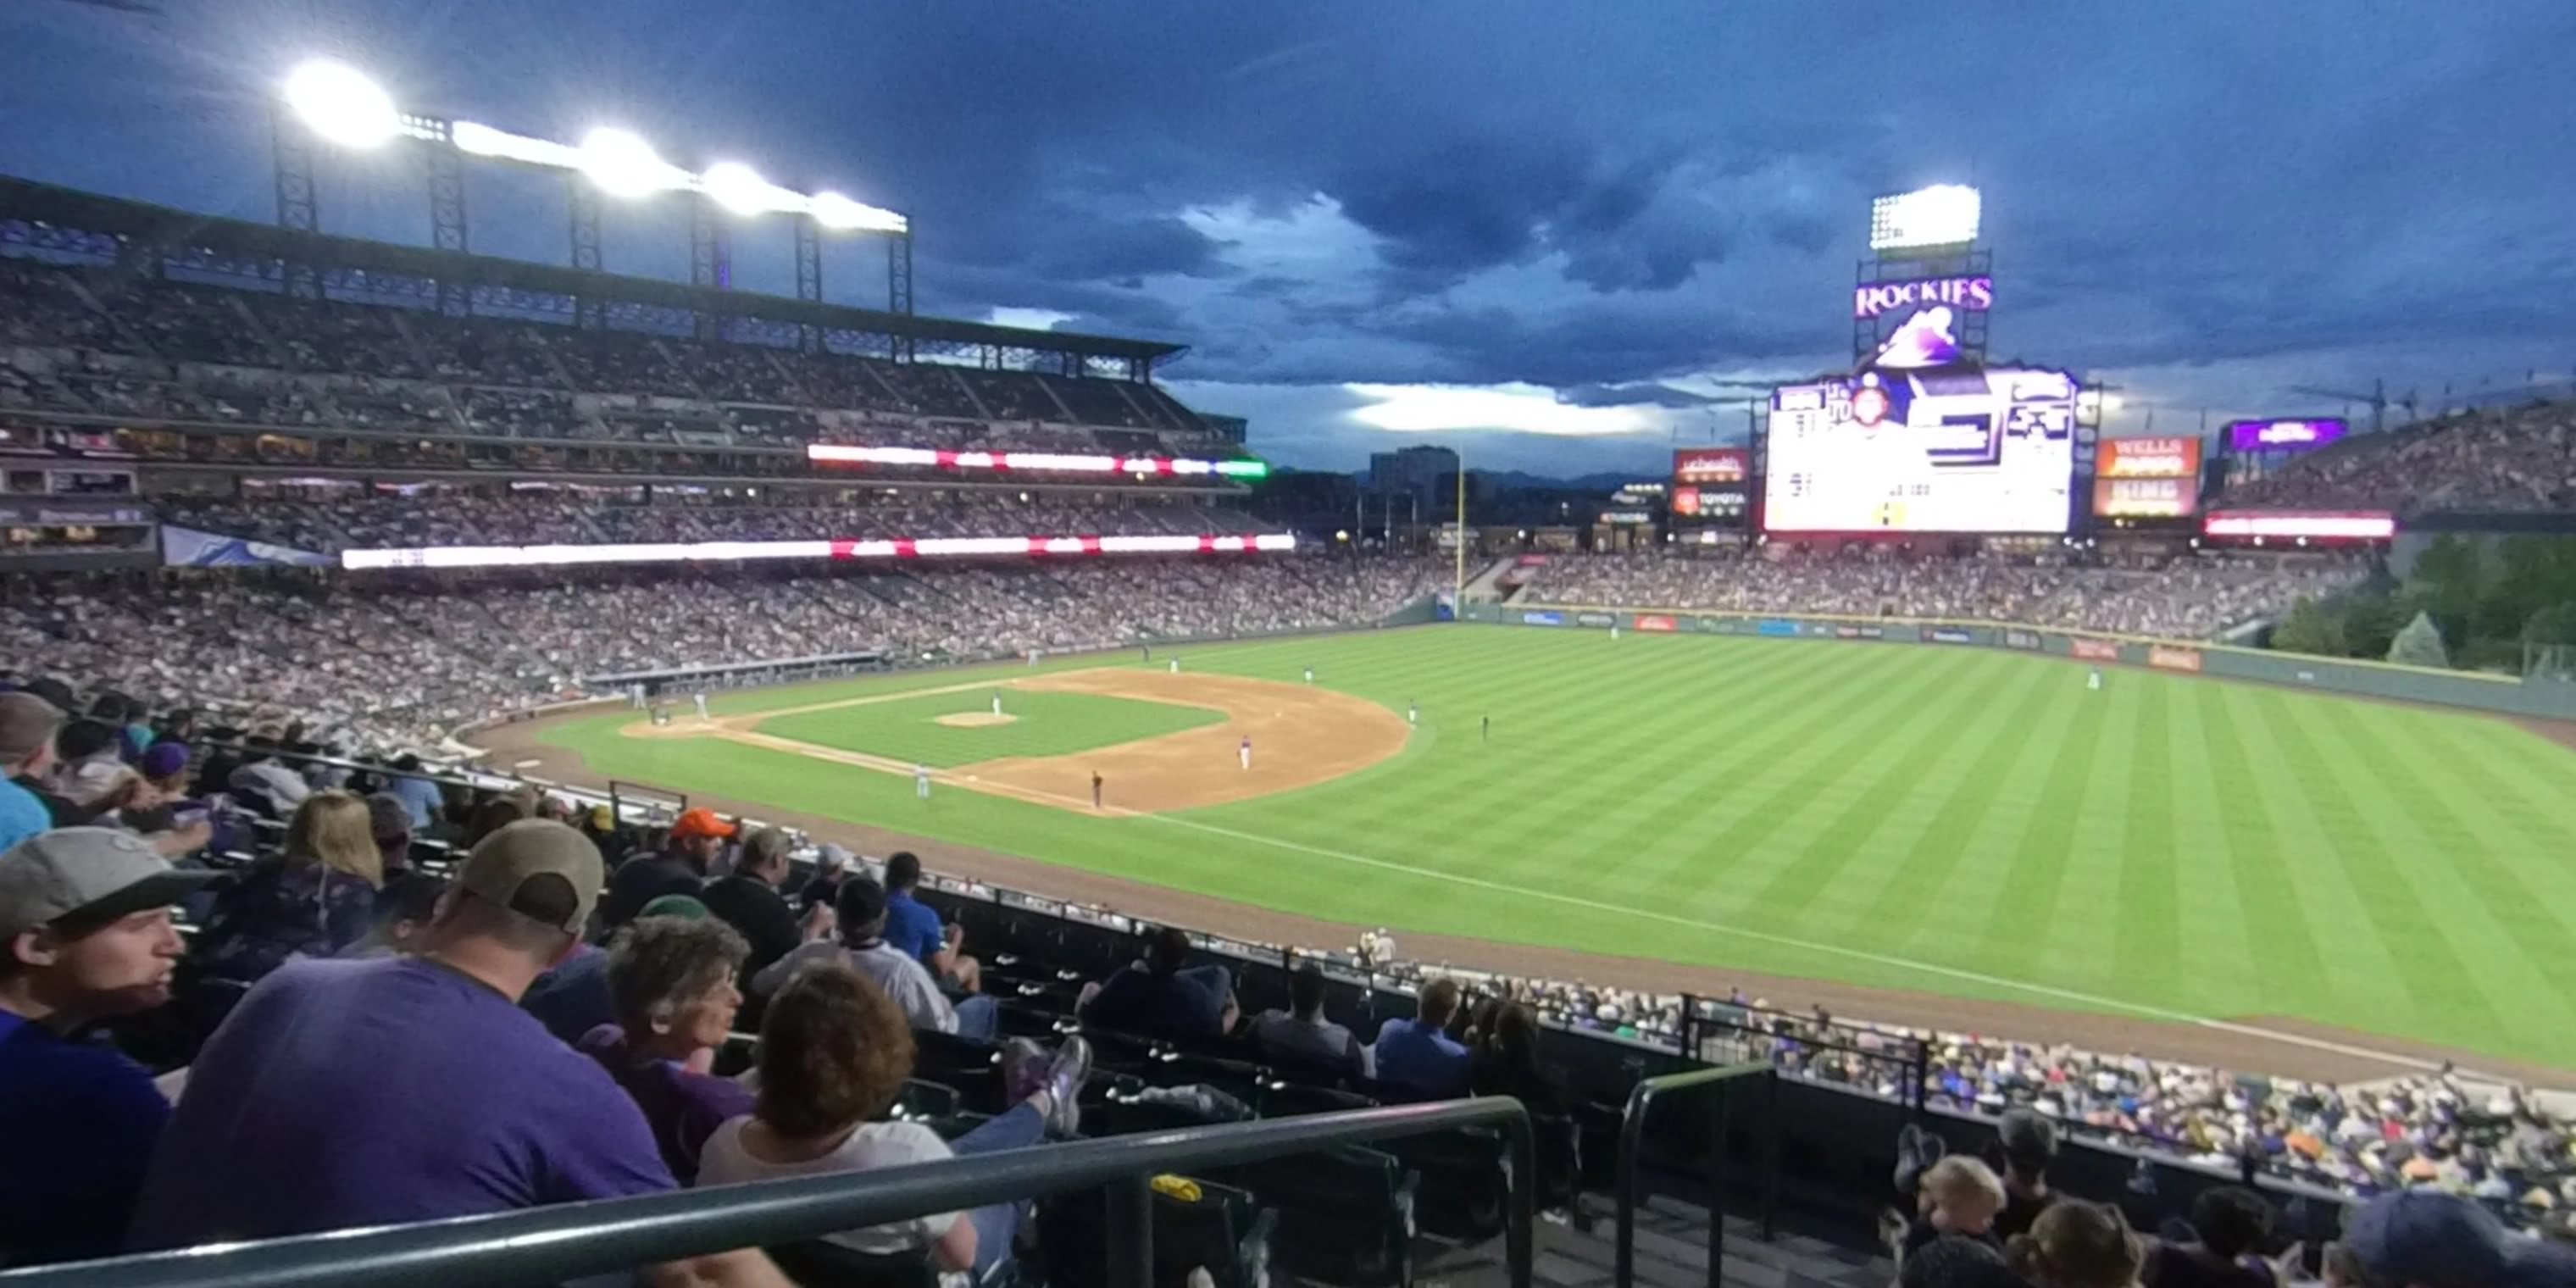 section 216 panoramic seat view  - coors field